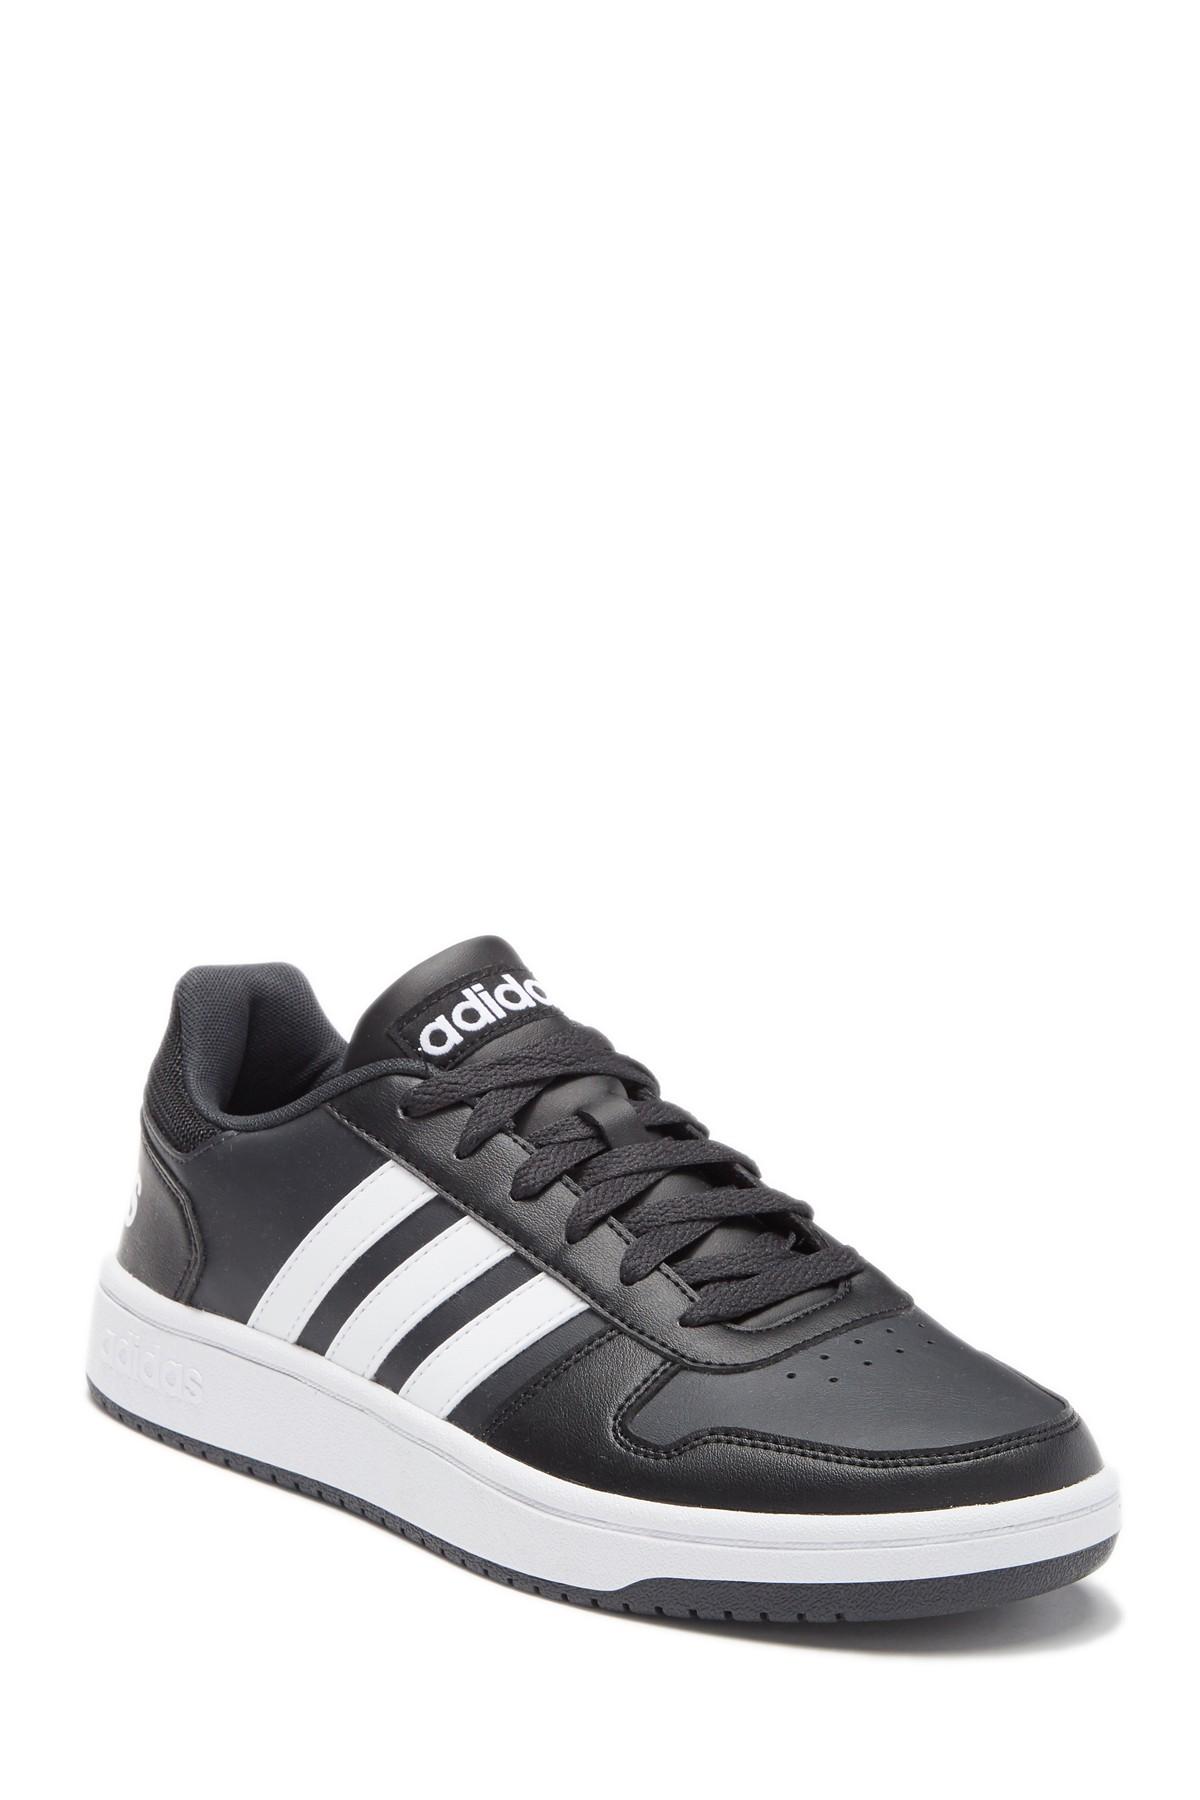 adidas Hoops 2.0 Lace-up Sneaker in Black for Men - Save 19% - Lyst